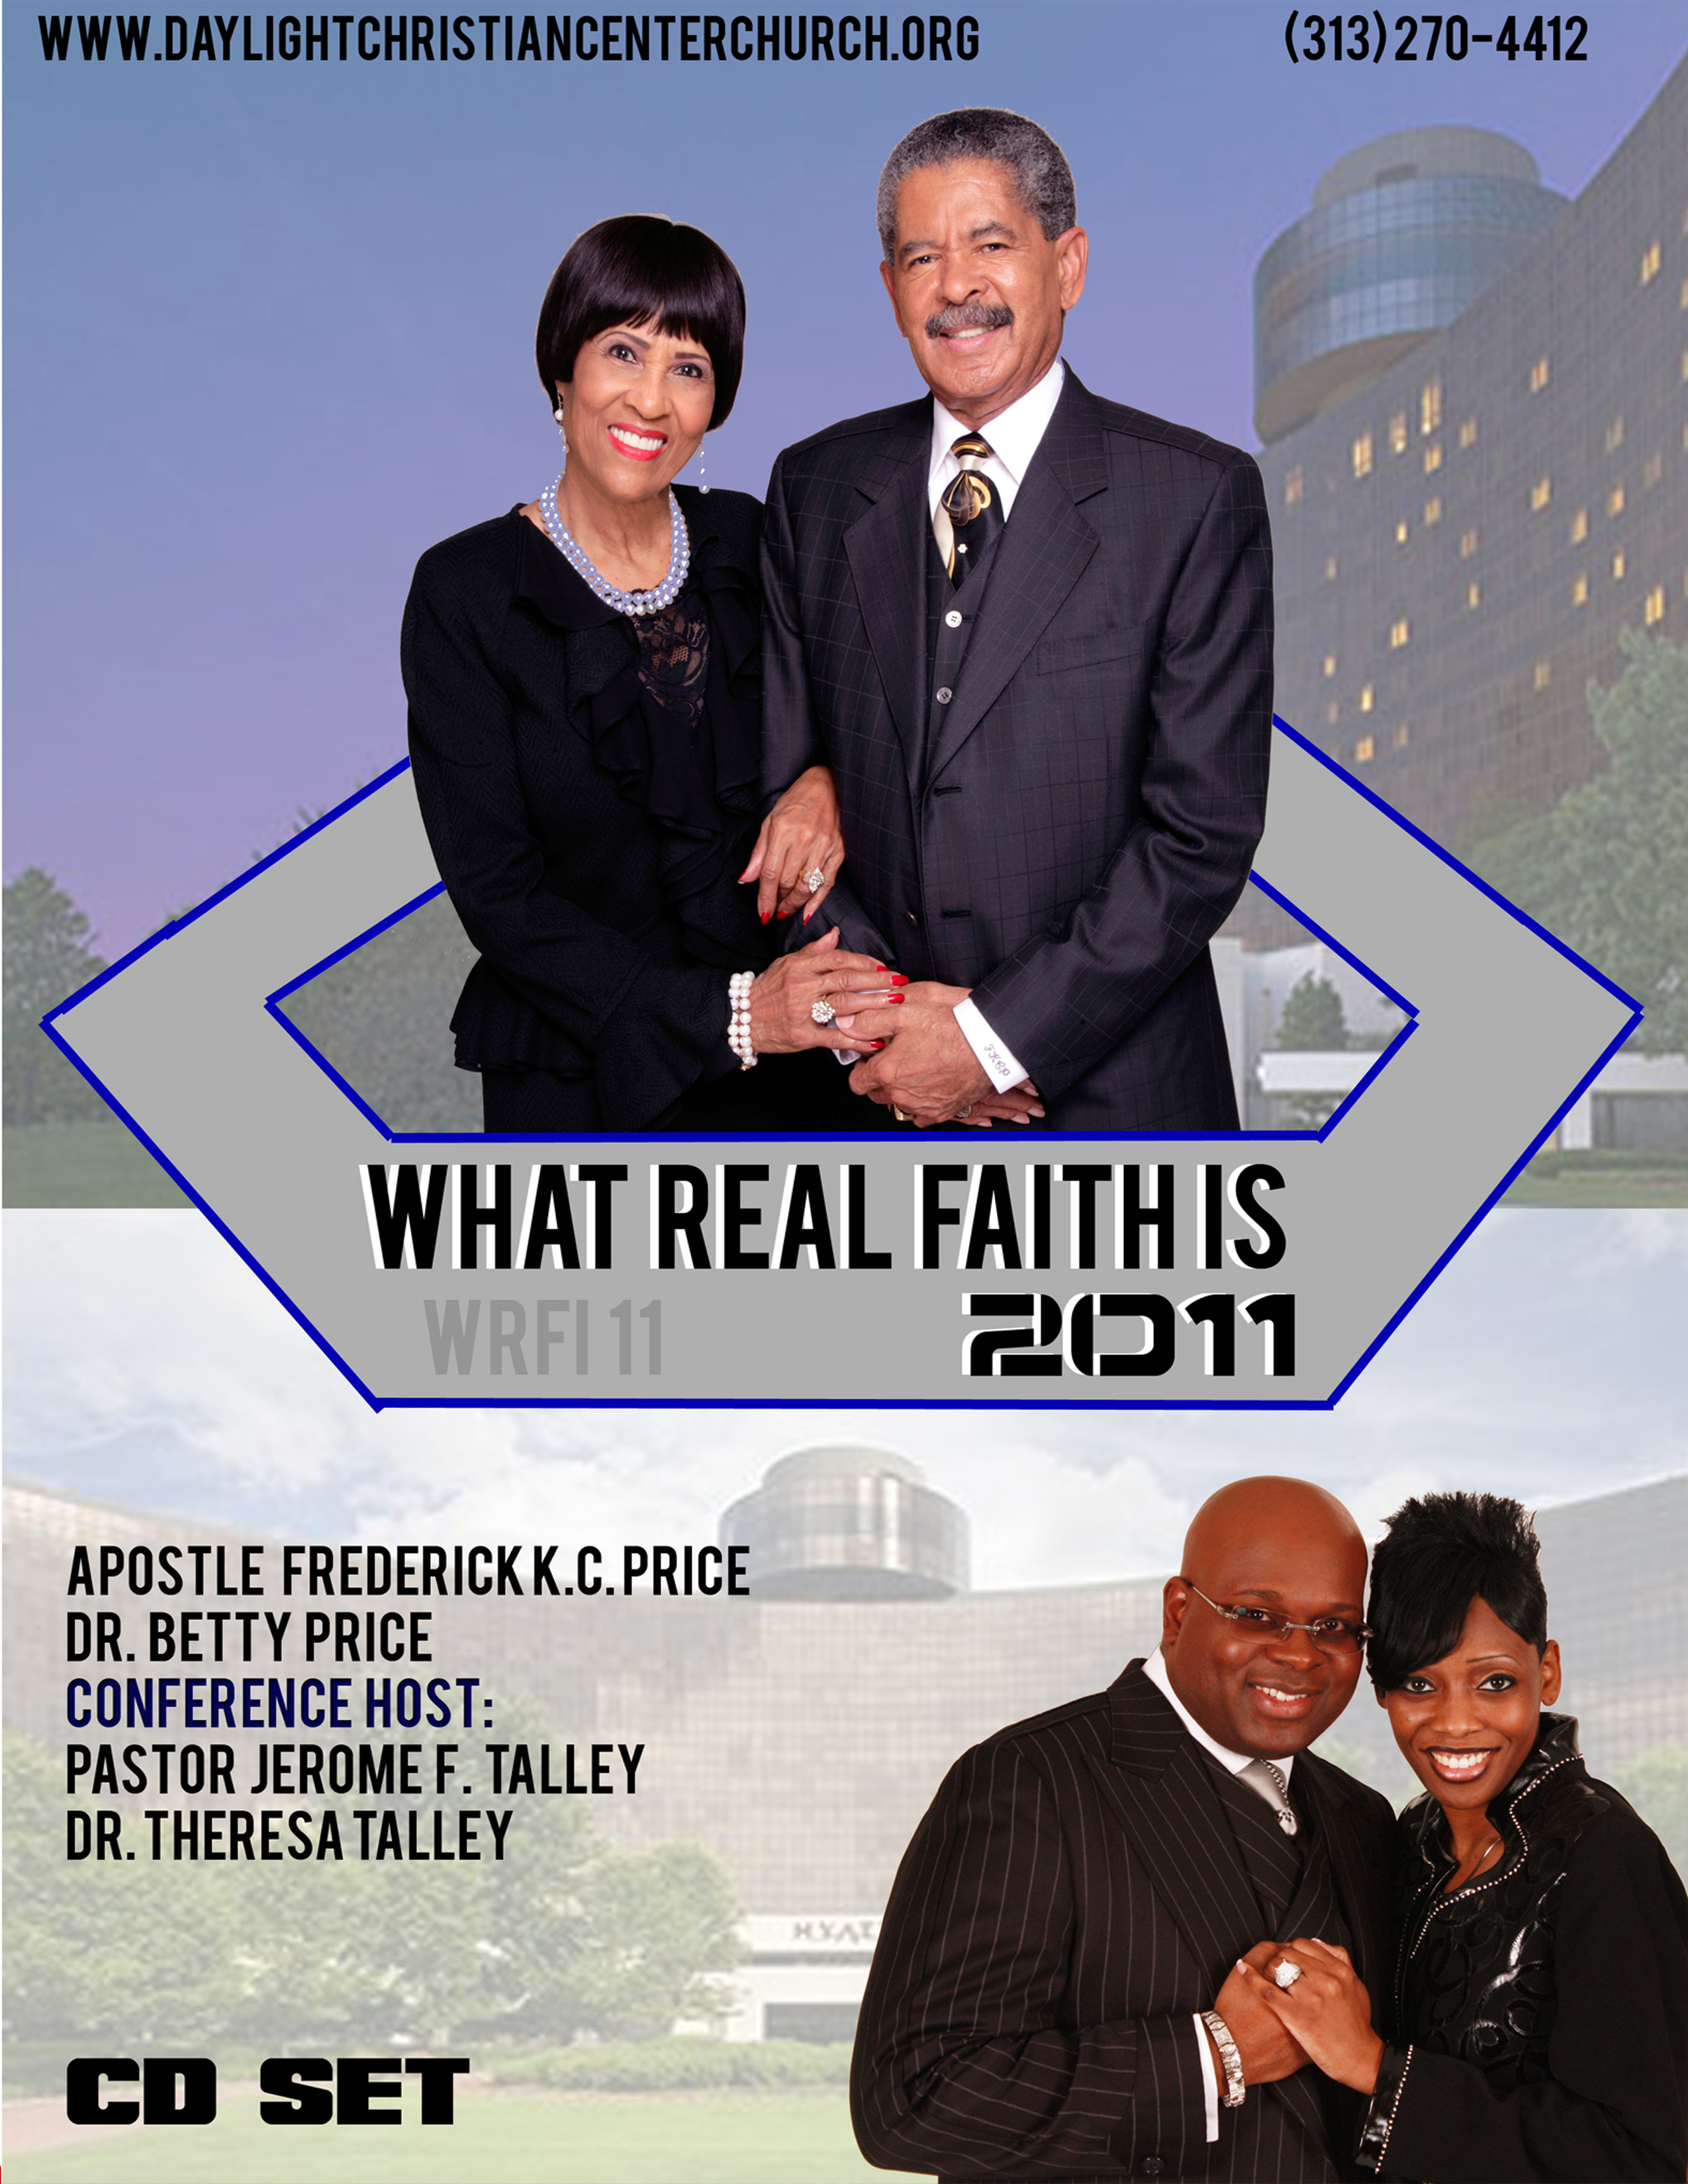 What Real Faith Is 2011 CD Set